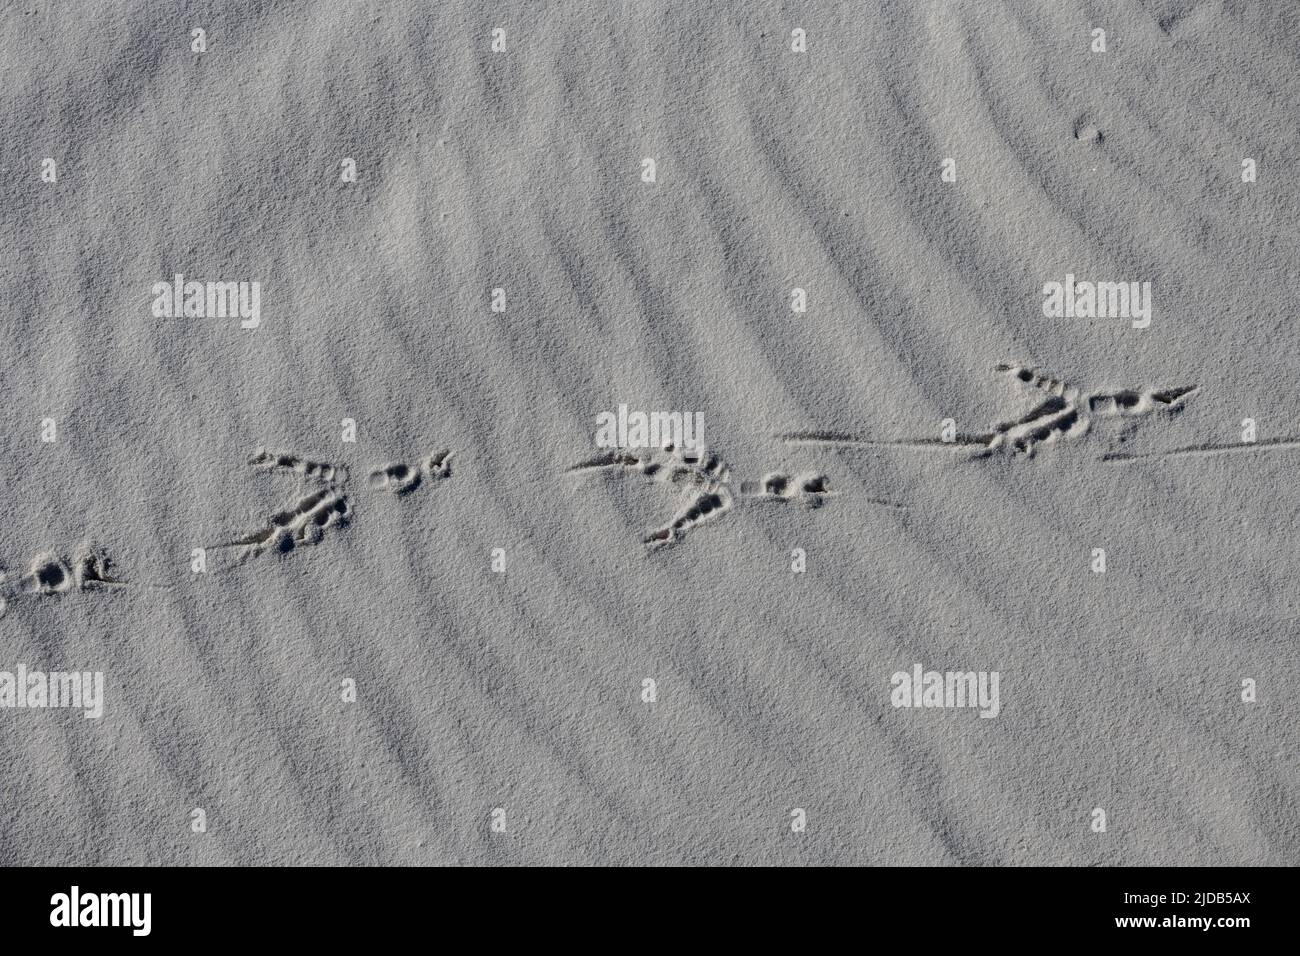 Bird Tracks across the White Gypsum Sands of the White Sands National Monument Stock Photo